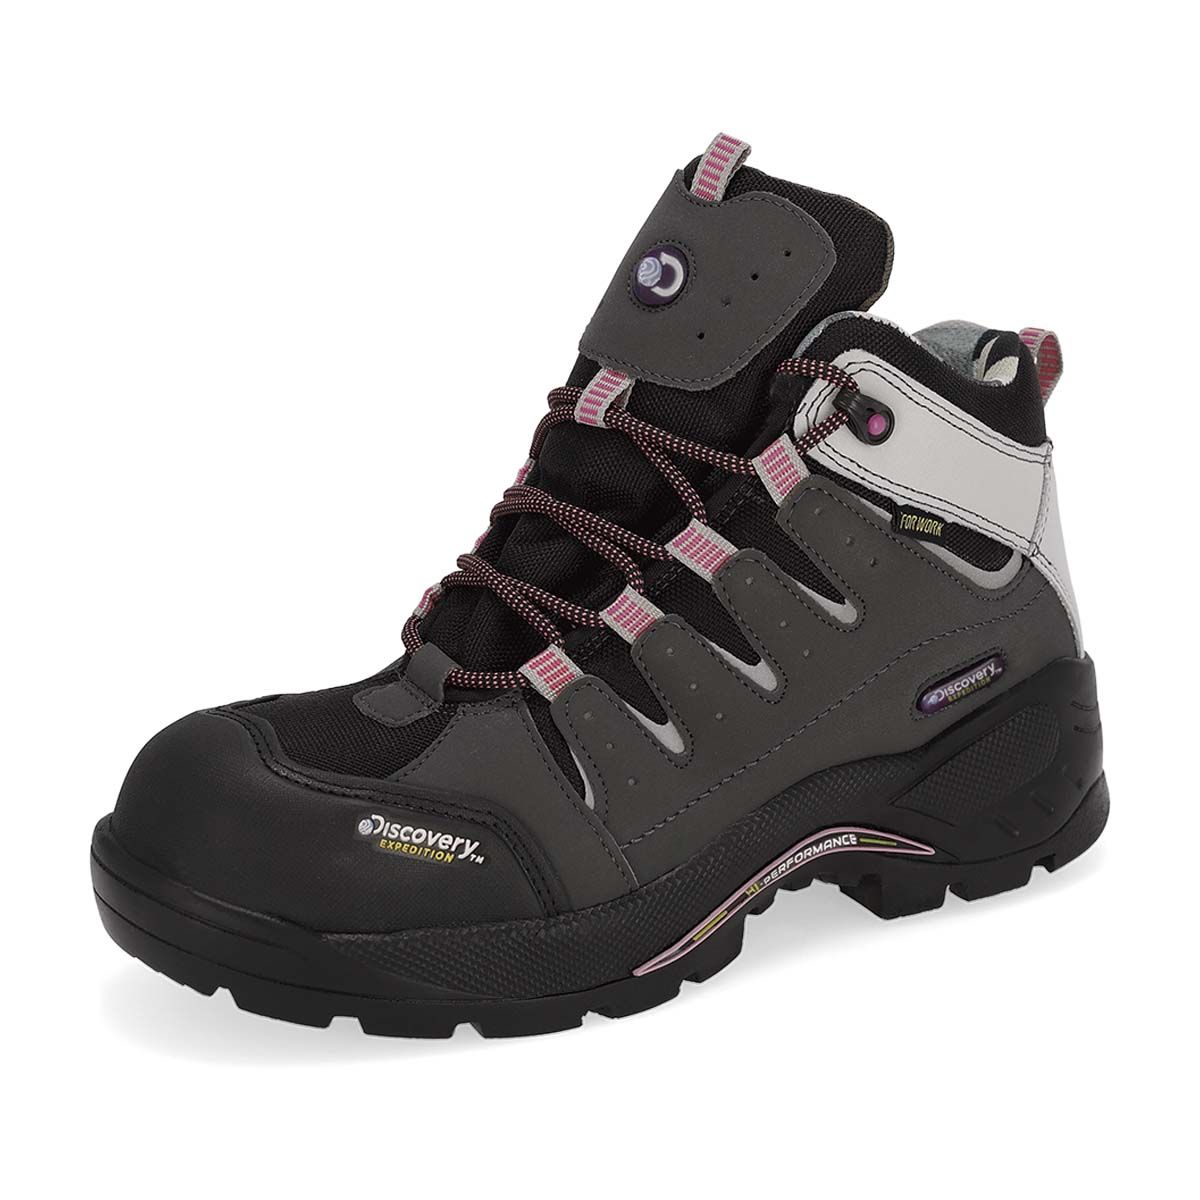 BOTA CASCO DIELECTRICO MUJER DISCOVERY 1958 GRIS/ROSA